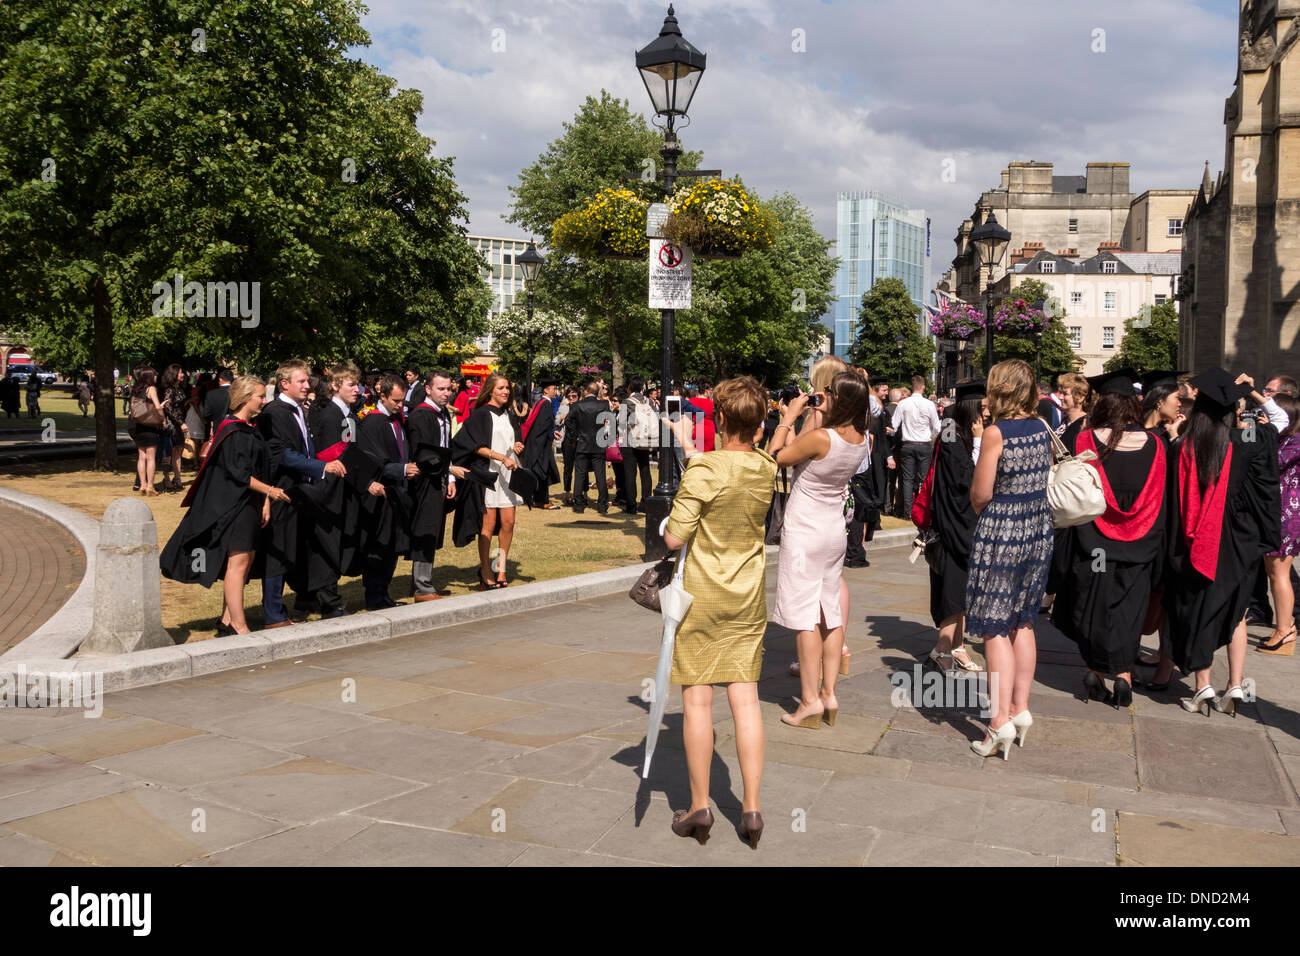 UWE (University of the West of England) students in College Green after graduation ceremony at Bristol Cathedral, UK Stock Photo